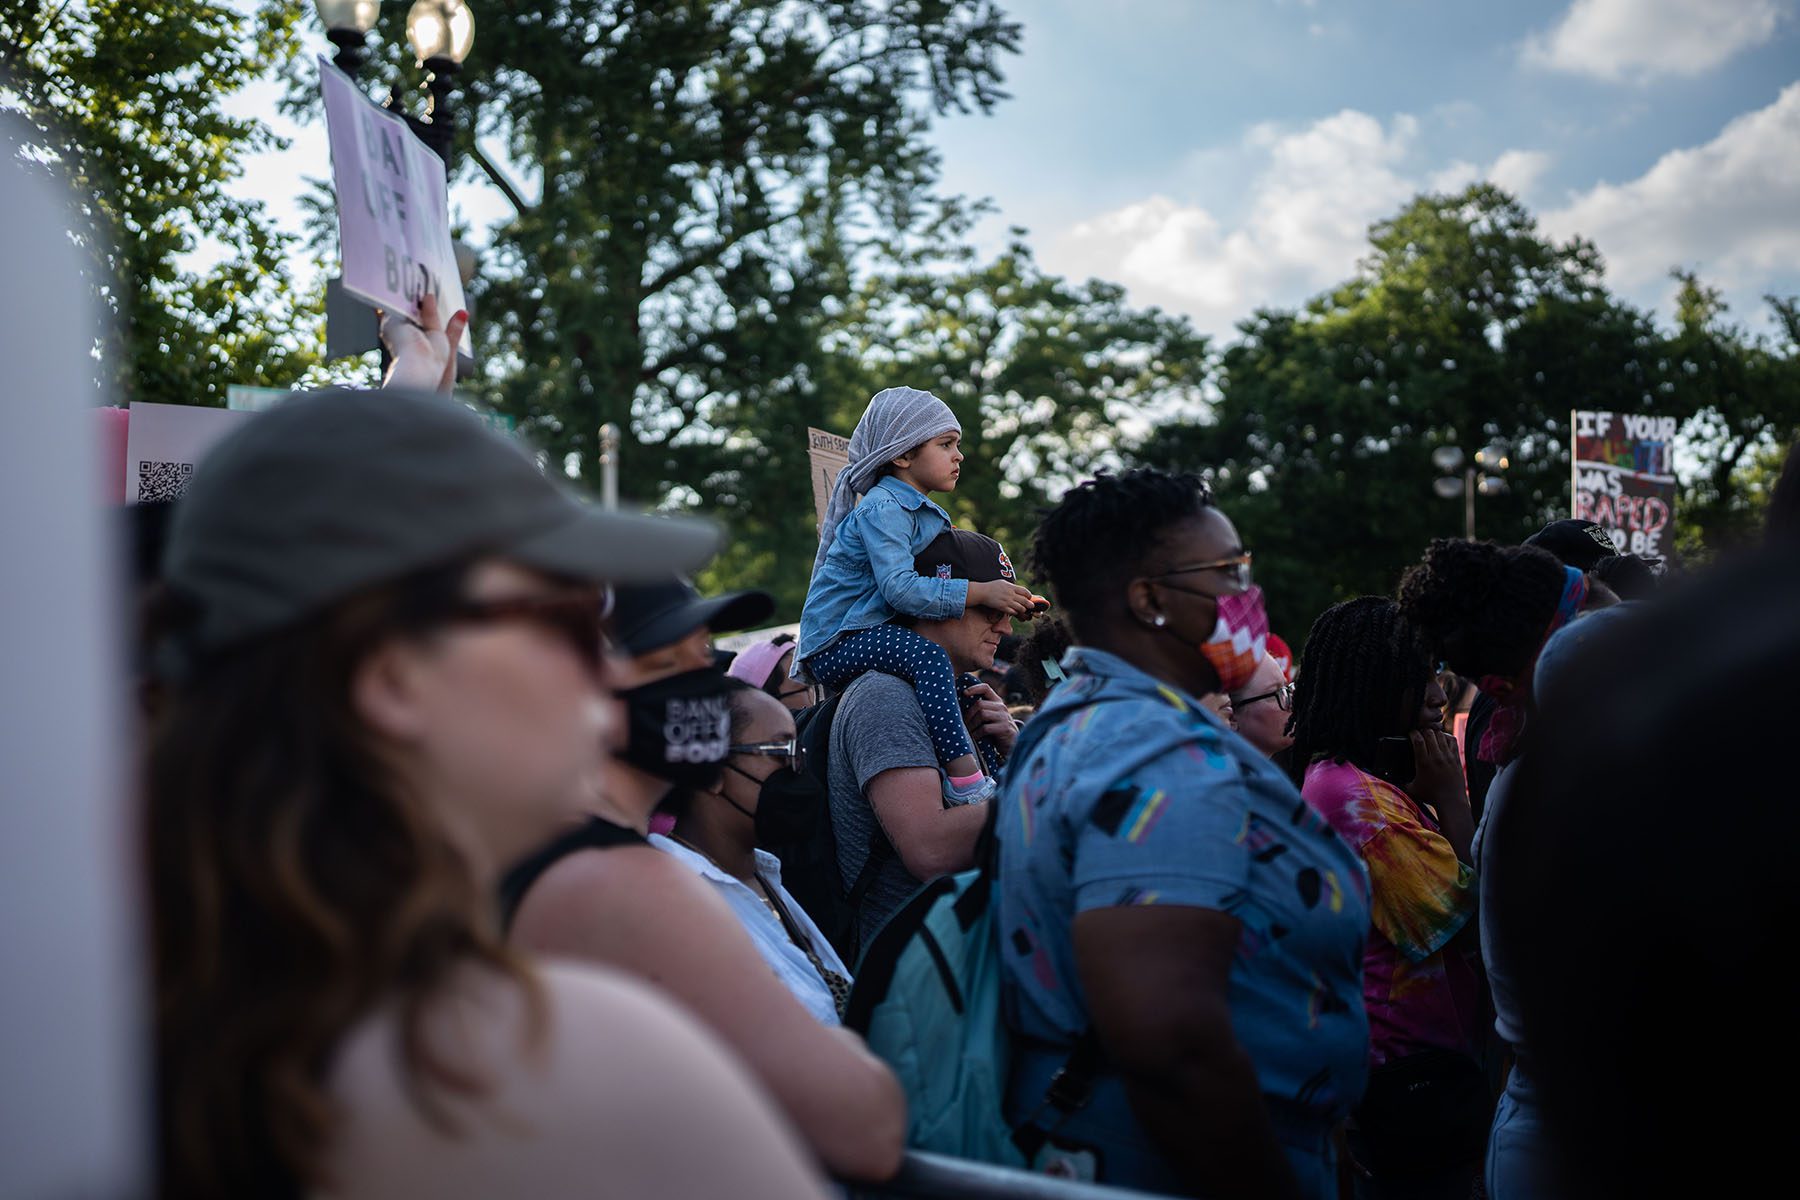 A child is seen on their parents' shoulders as Abortion rights demonstrators gather outside the U.S. Supreme Court.